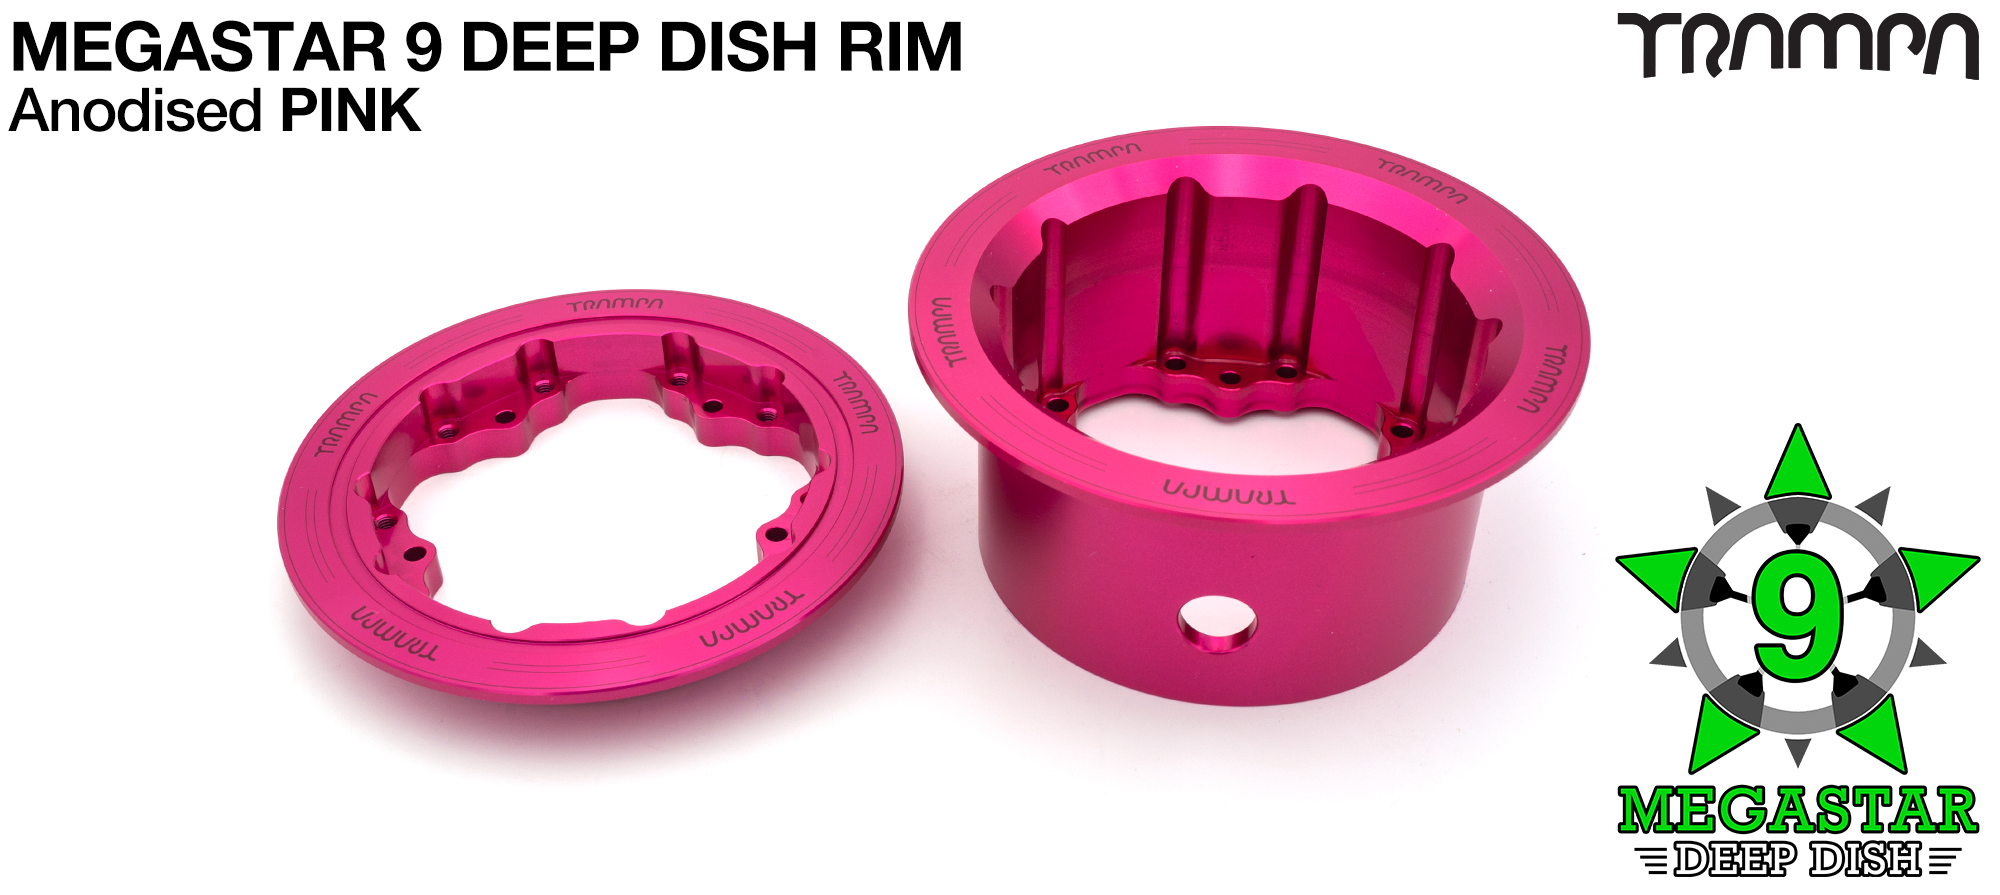 MEGASTAR 9 DEEP-DISH Rims Measure 3.75/4x 3 Inch. The Bearings are positioned OFF-SET & accept 4 Inch Rim Tyres to make 9 or 10 inch Wheels - PINK